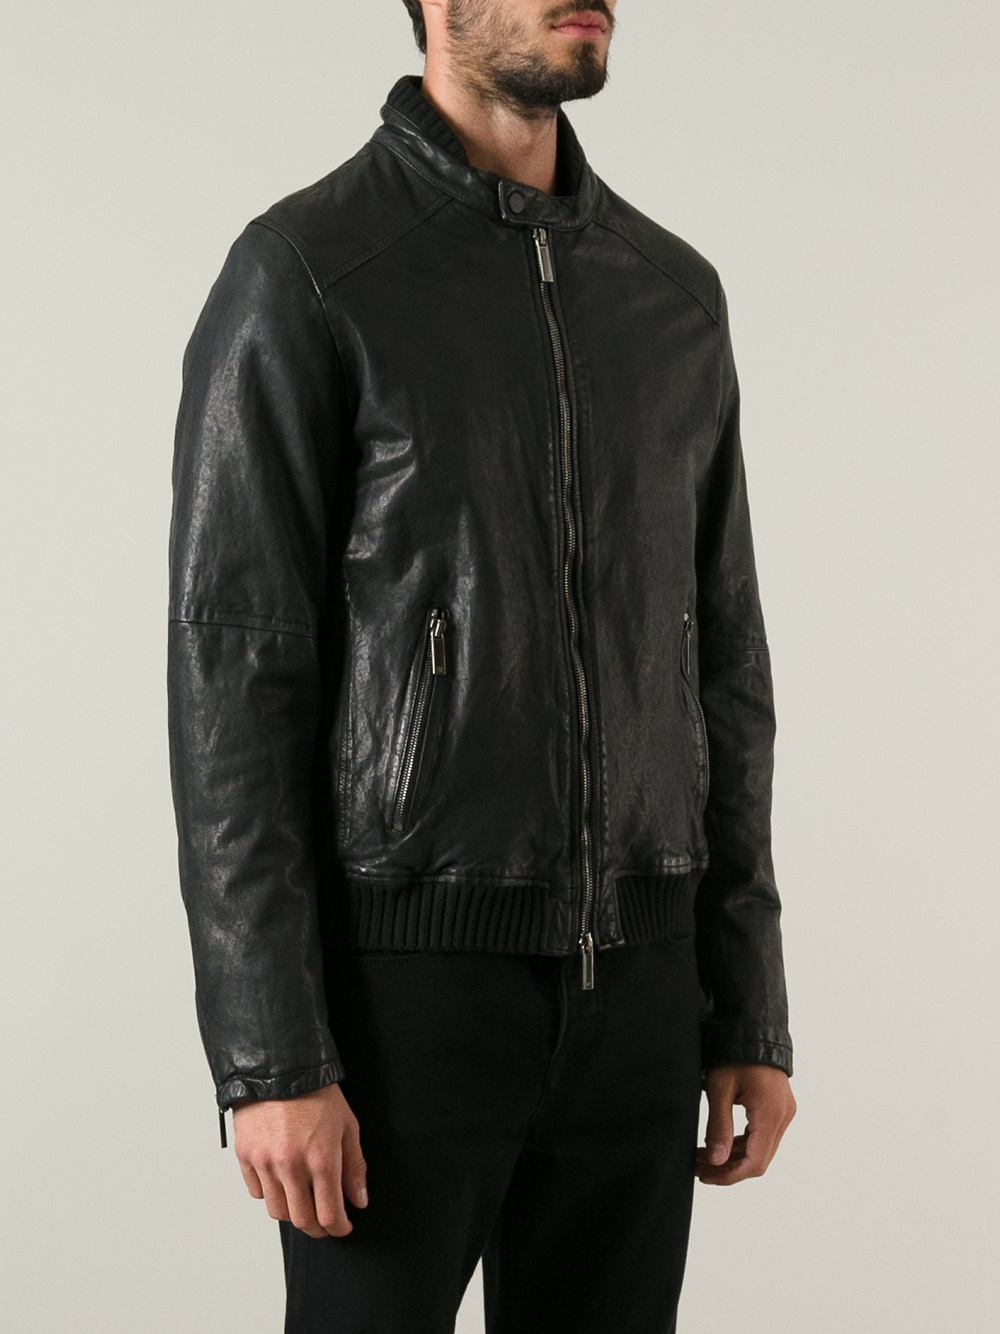 Emporio Armani Leather Jacket in Black for Men - Lyst